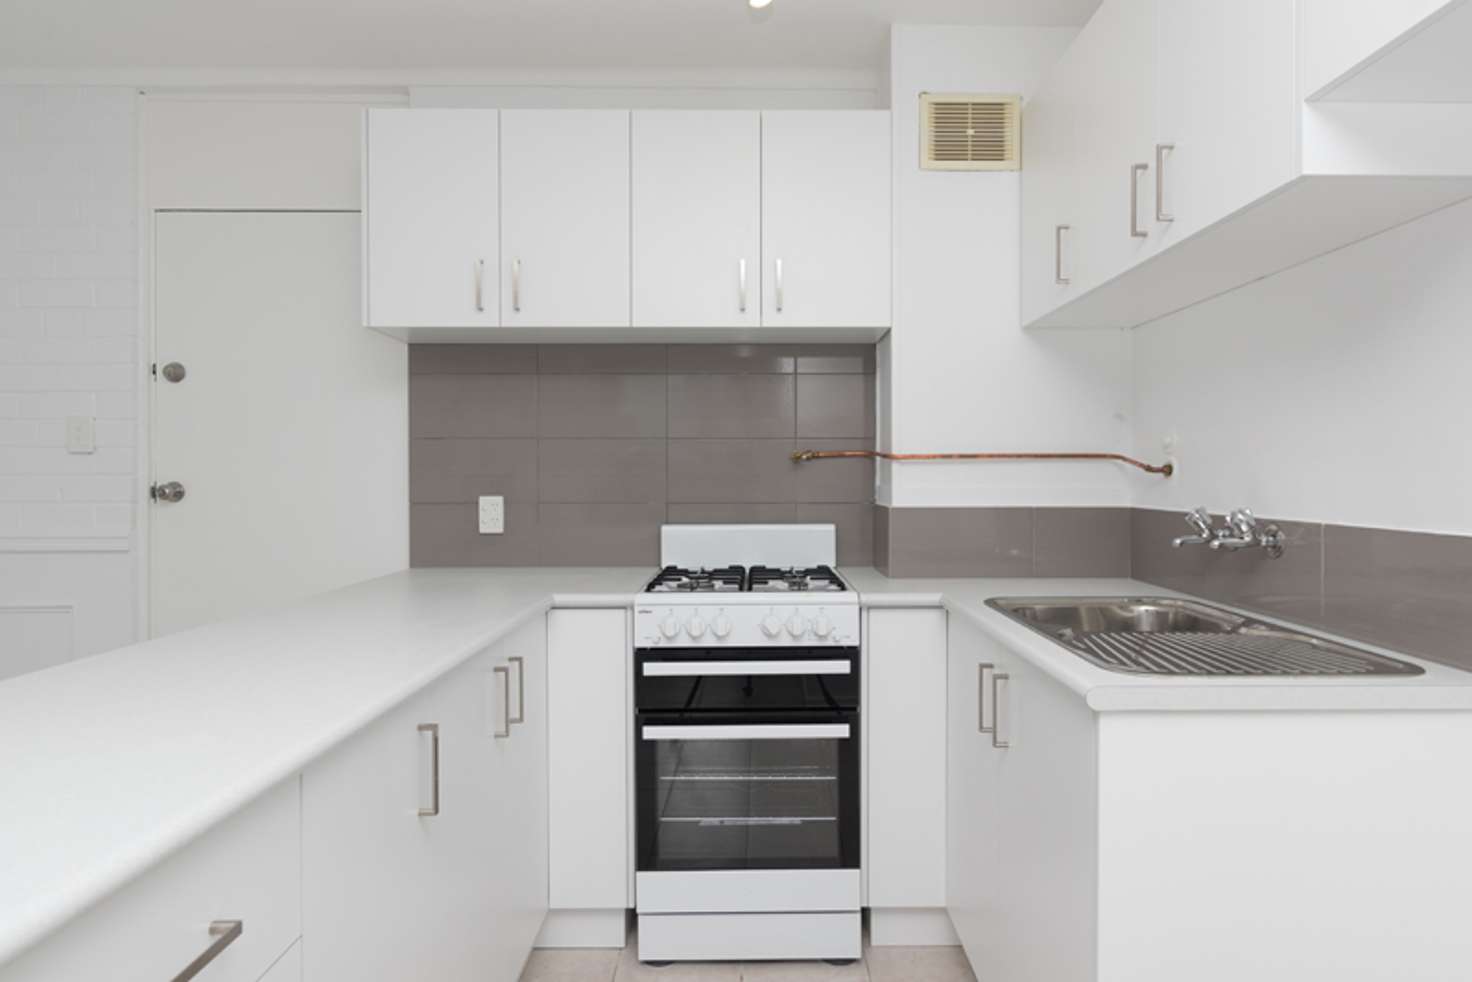 Main view of Homely apartment listing, 70/50 Kirkham Hill Terrace, Maylands WA 6051